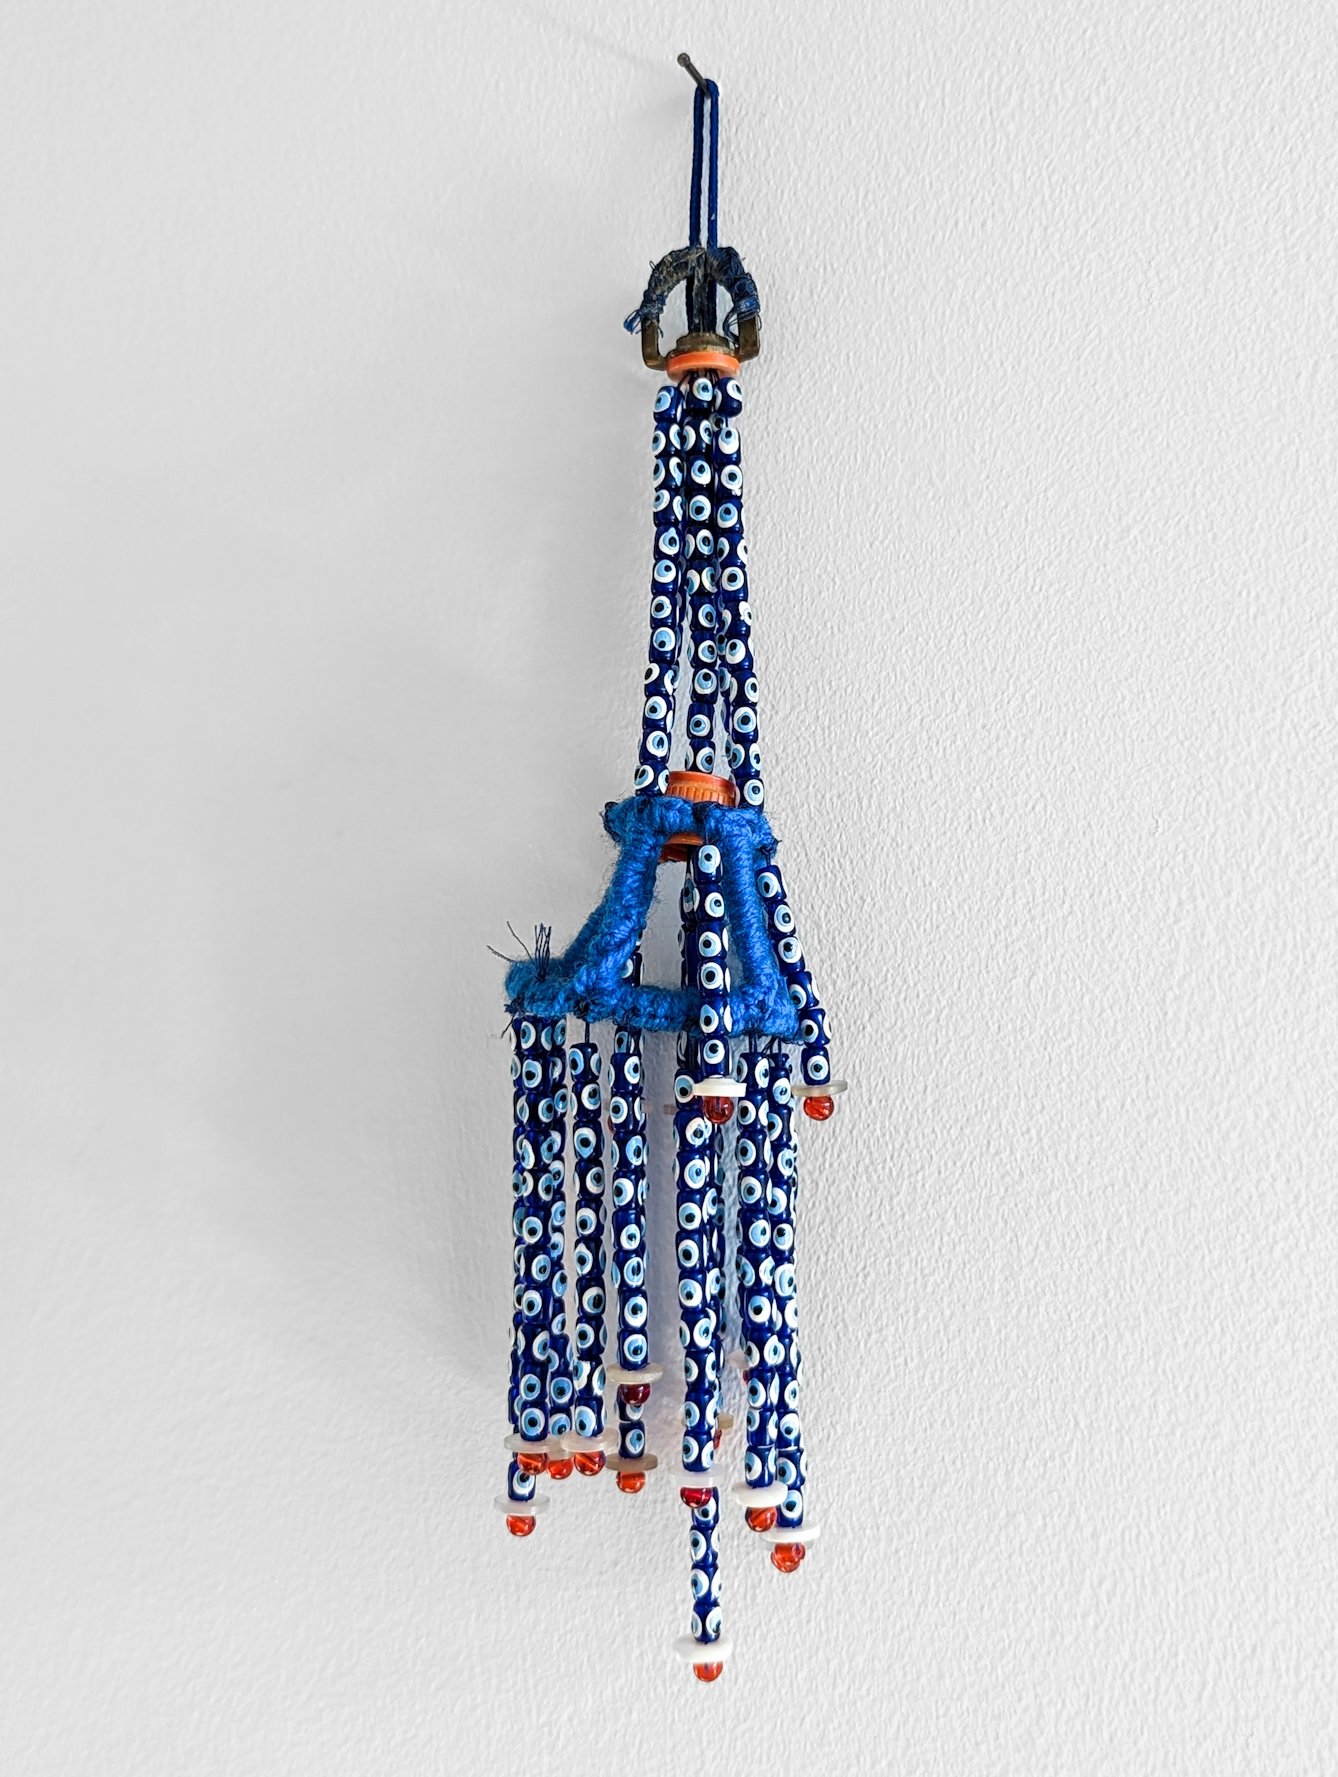 Strands of blue and white glass beads containing the circular 'evil eye' symbol form a wall-hanging, attached to a white wall by a single nail. Teh strands are connected together with reycled bootle tops and wool.